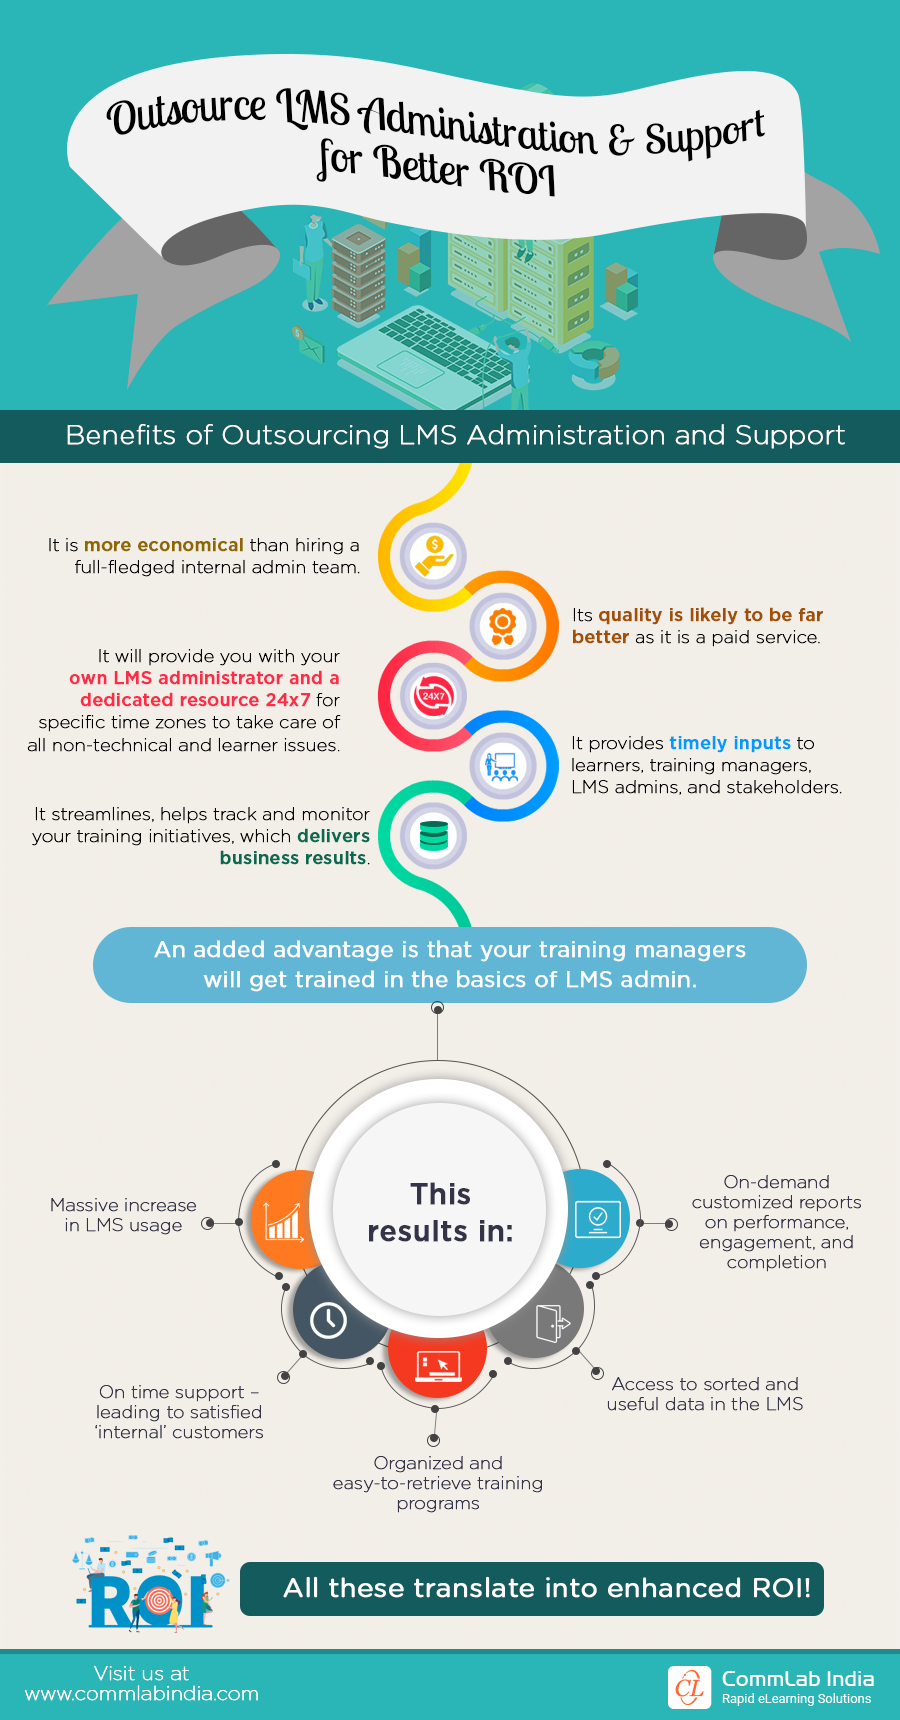 Outsourcing LMS Administration and Support for Enhanced ROI